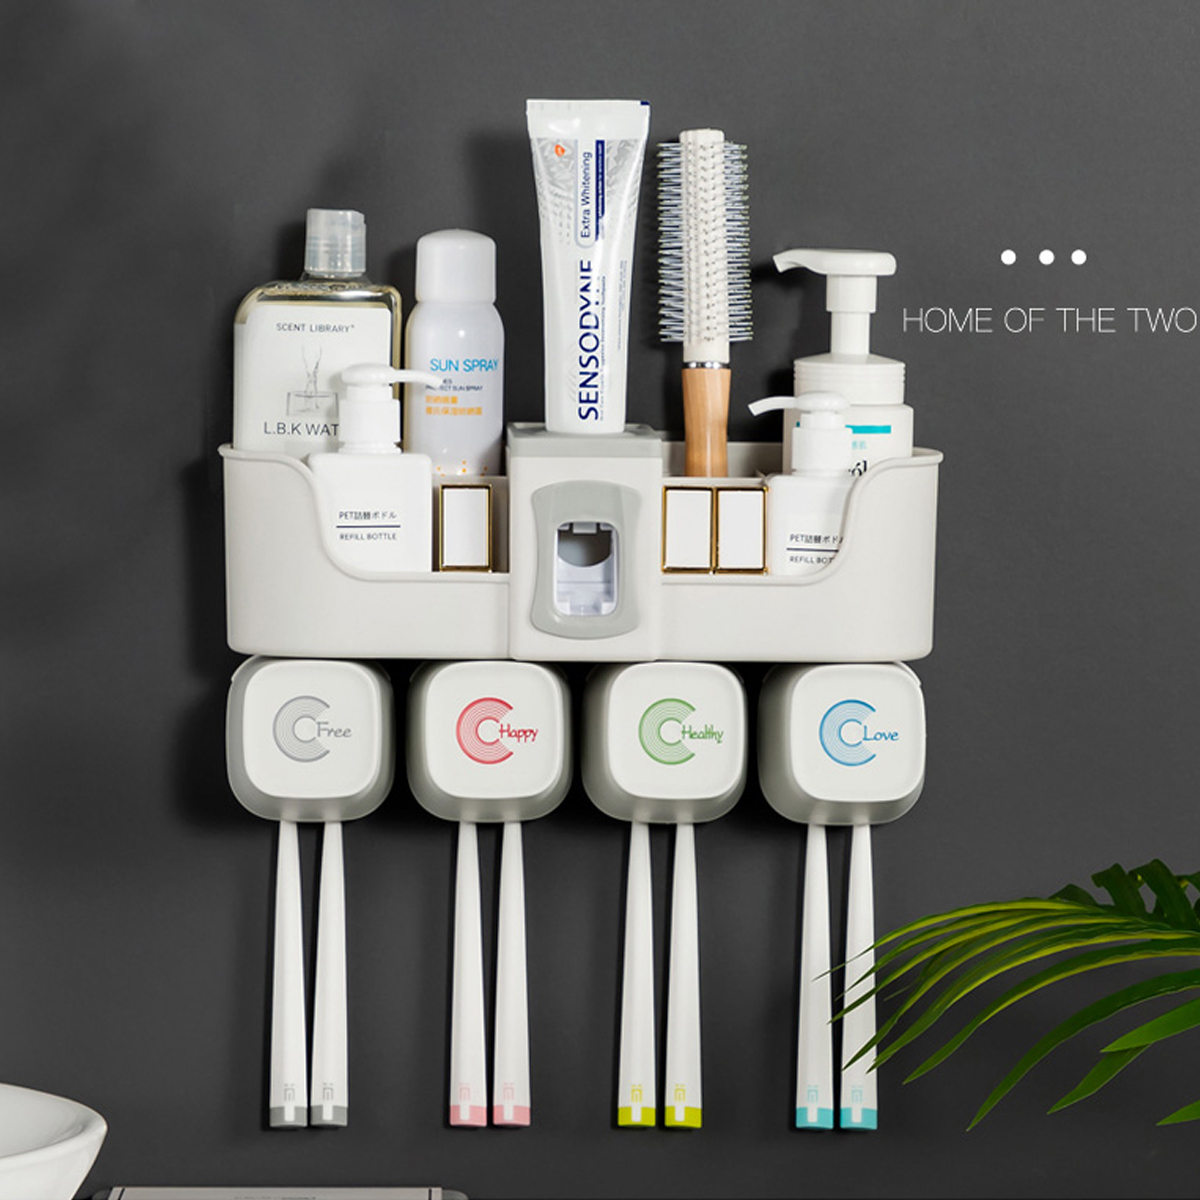 Toothbrush-Holder-Mulitfunction-Wall-Toothpaste-Squeezer-Dispenser-for-Bathroom-Accessories-Storage--1838135-2